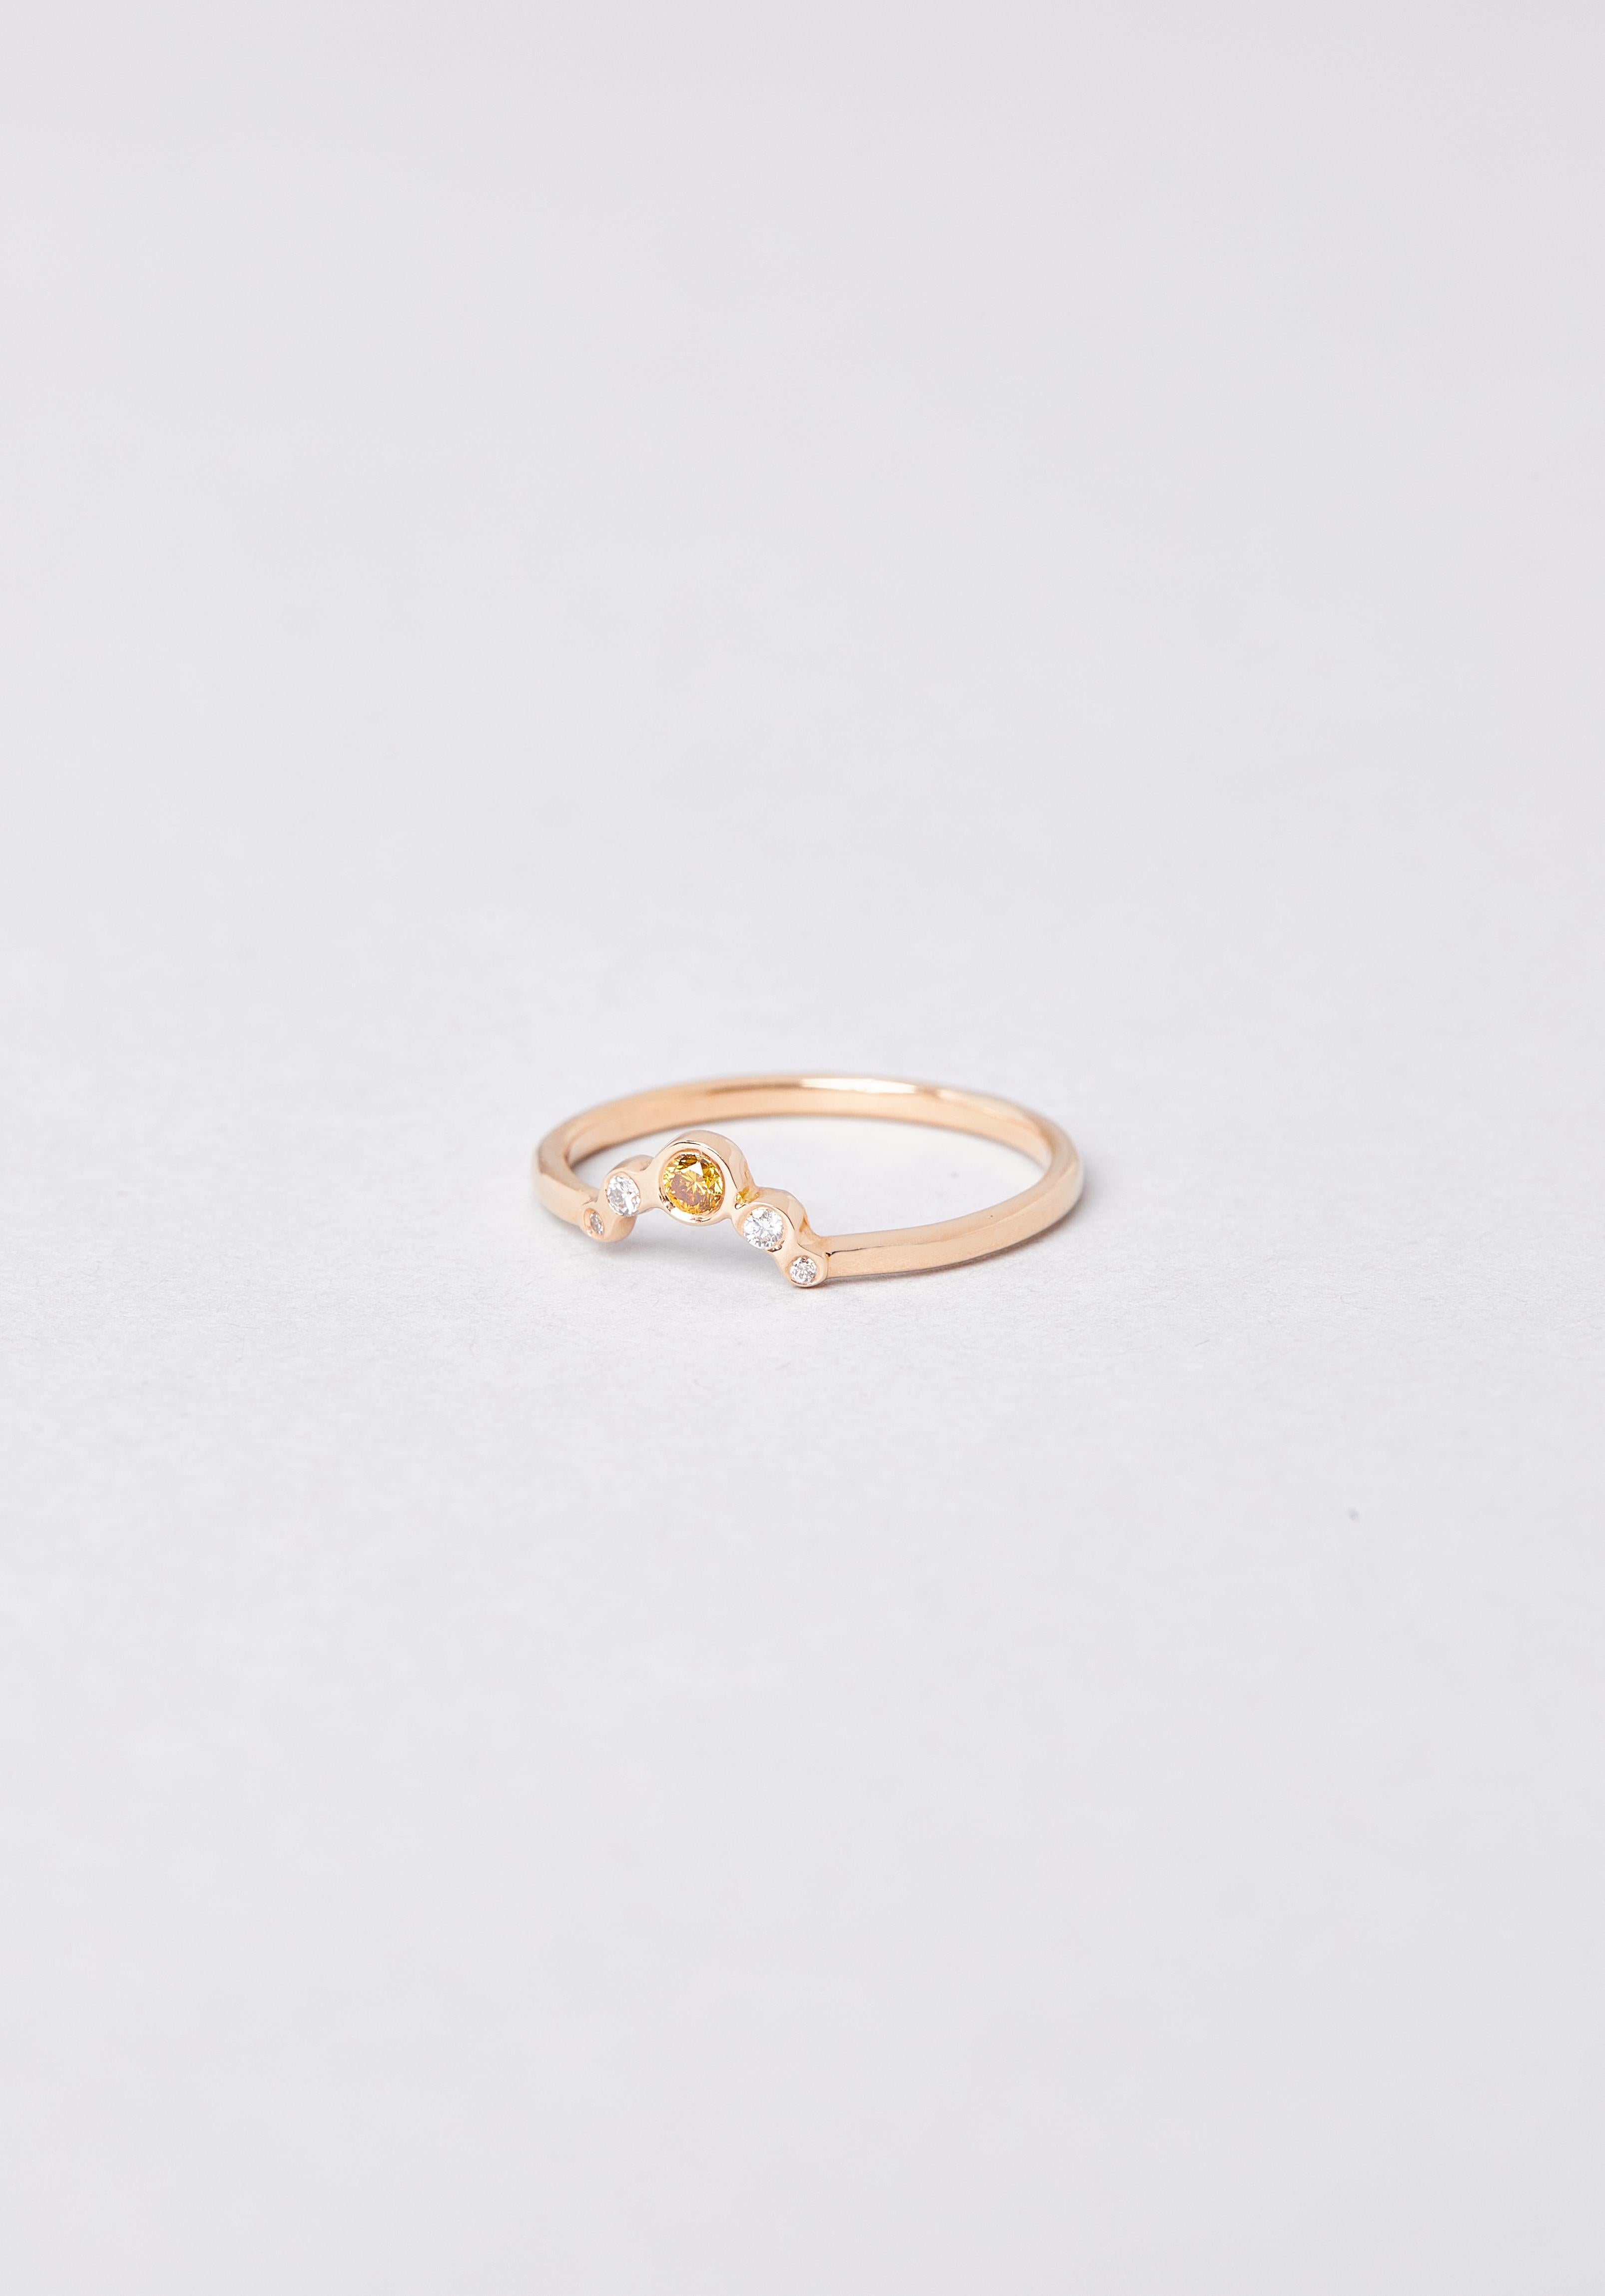 Feminine and delicate 18 carat yellow gold ring, the Fanny ring is distinguished by its ornament: five white diamonds shine on your finger, in a royal composition. A real tiara. A piece for every day and forever: Fanny is ideal as an engagement